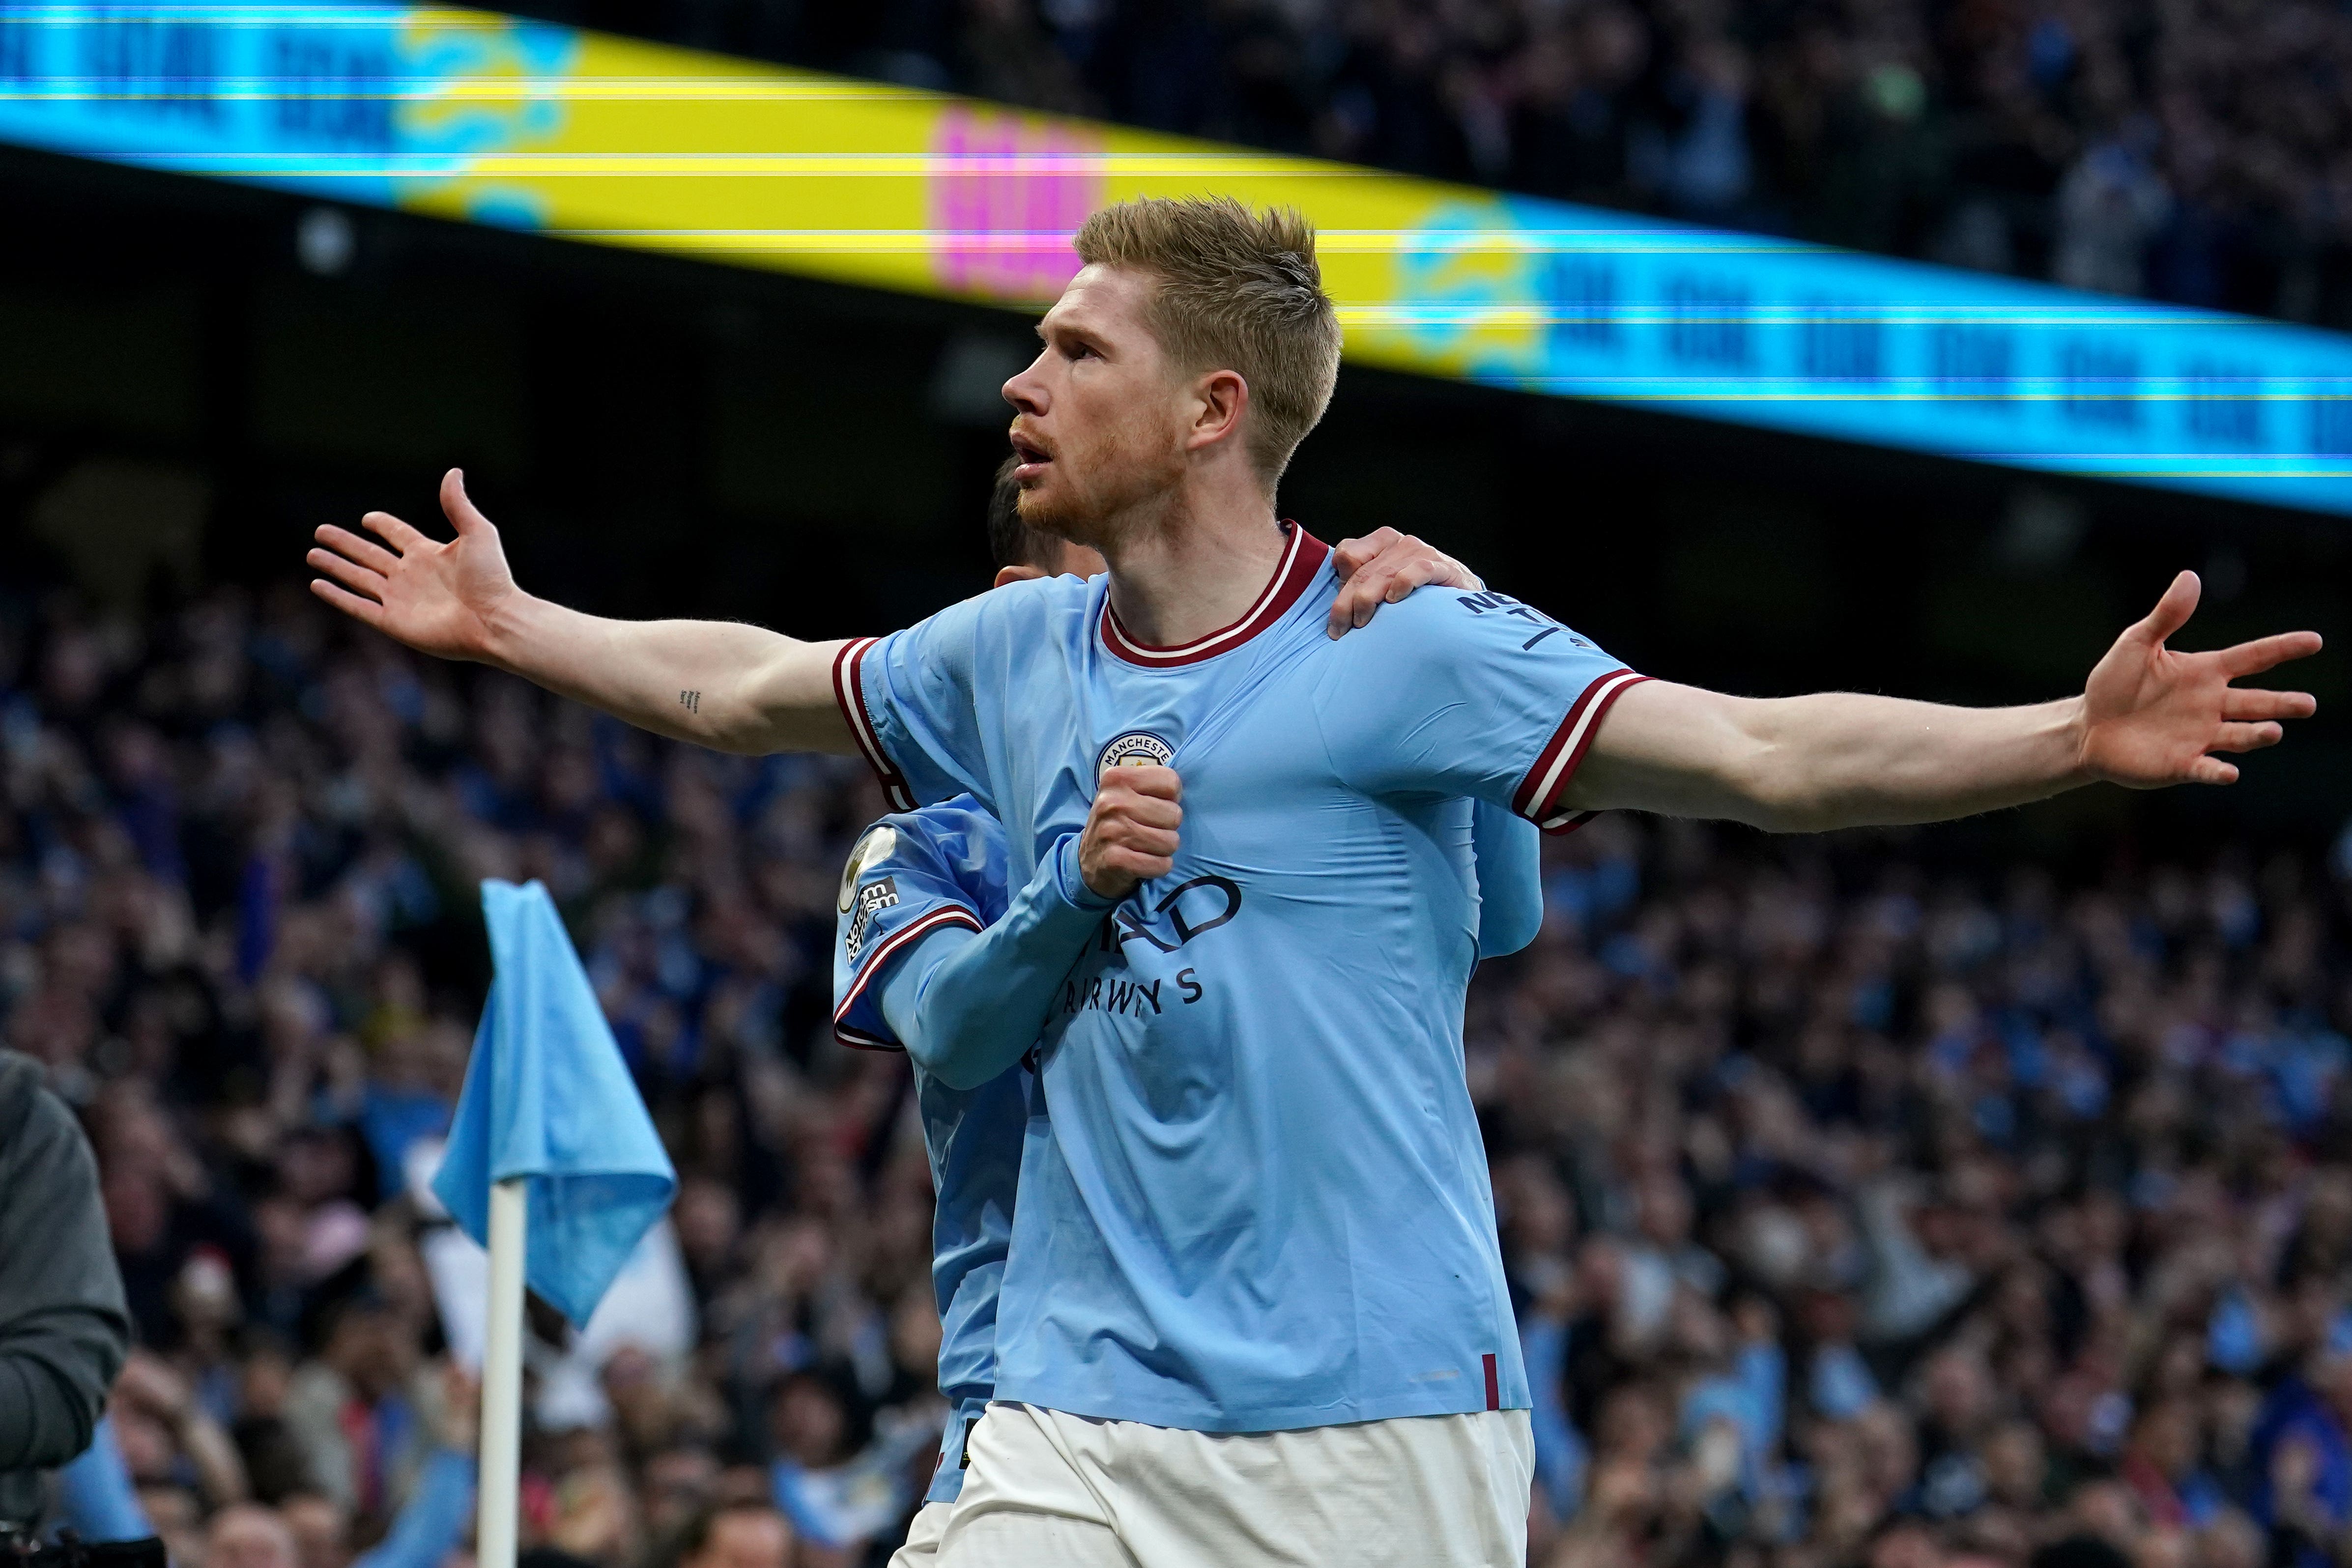 Kevin De Bruyne was simply outstanding for Man City